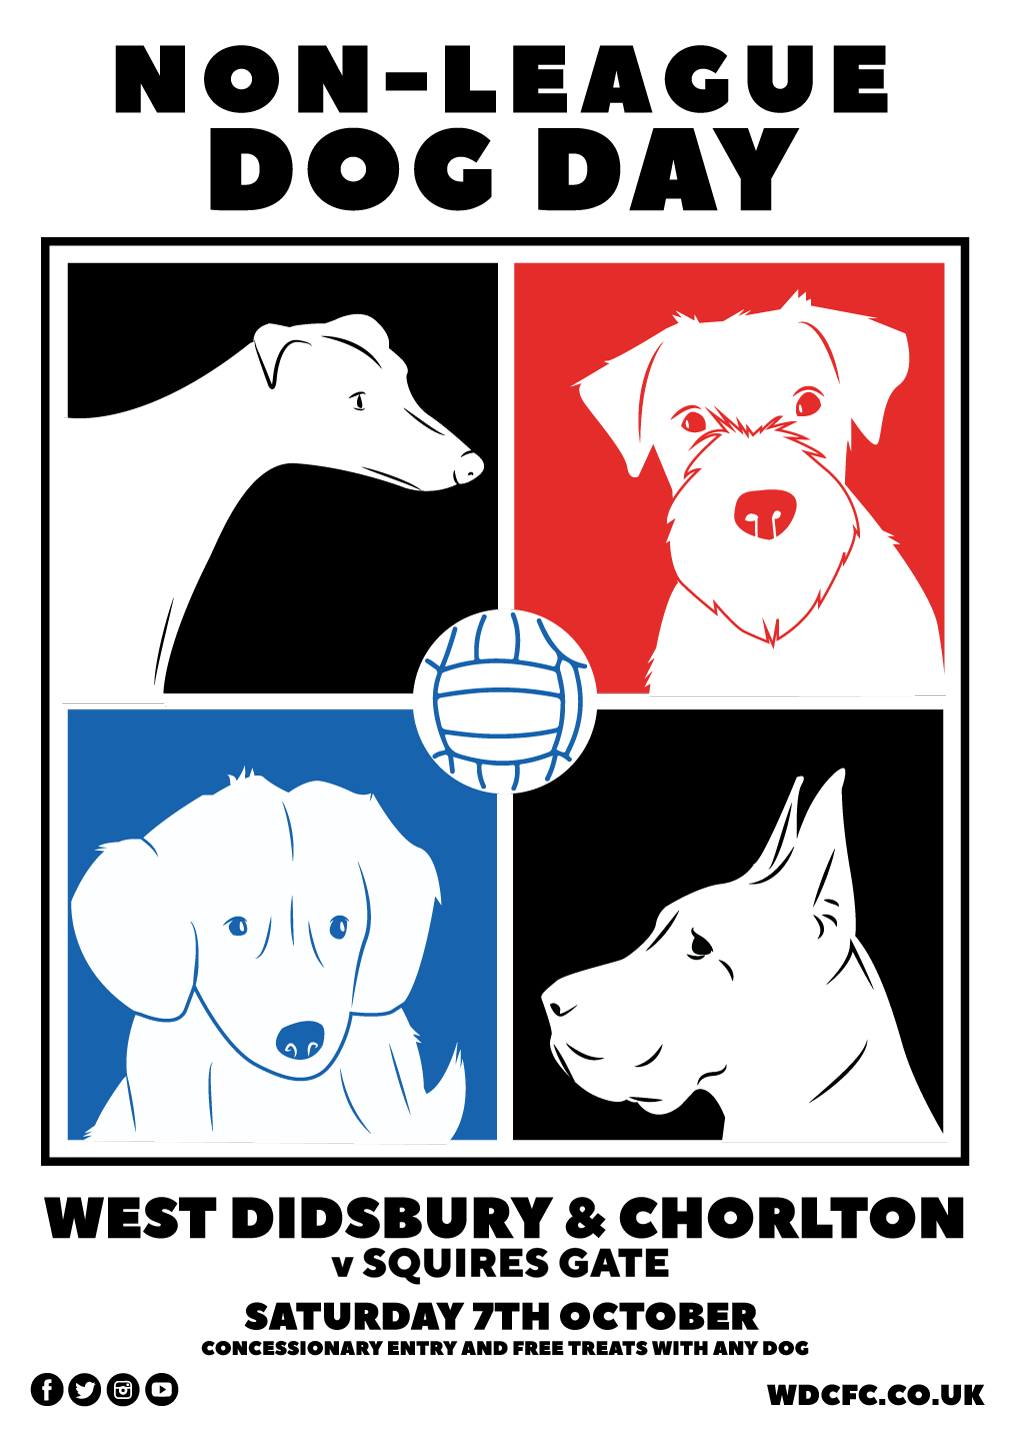 Announcing: Non League Dog Day, vs Squires Gate, 7 October  